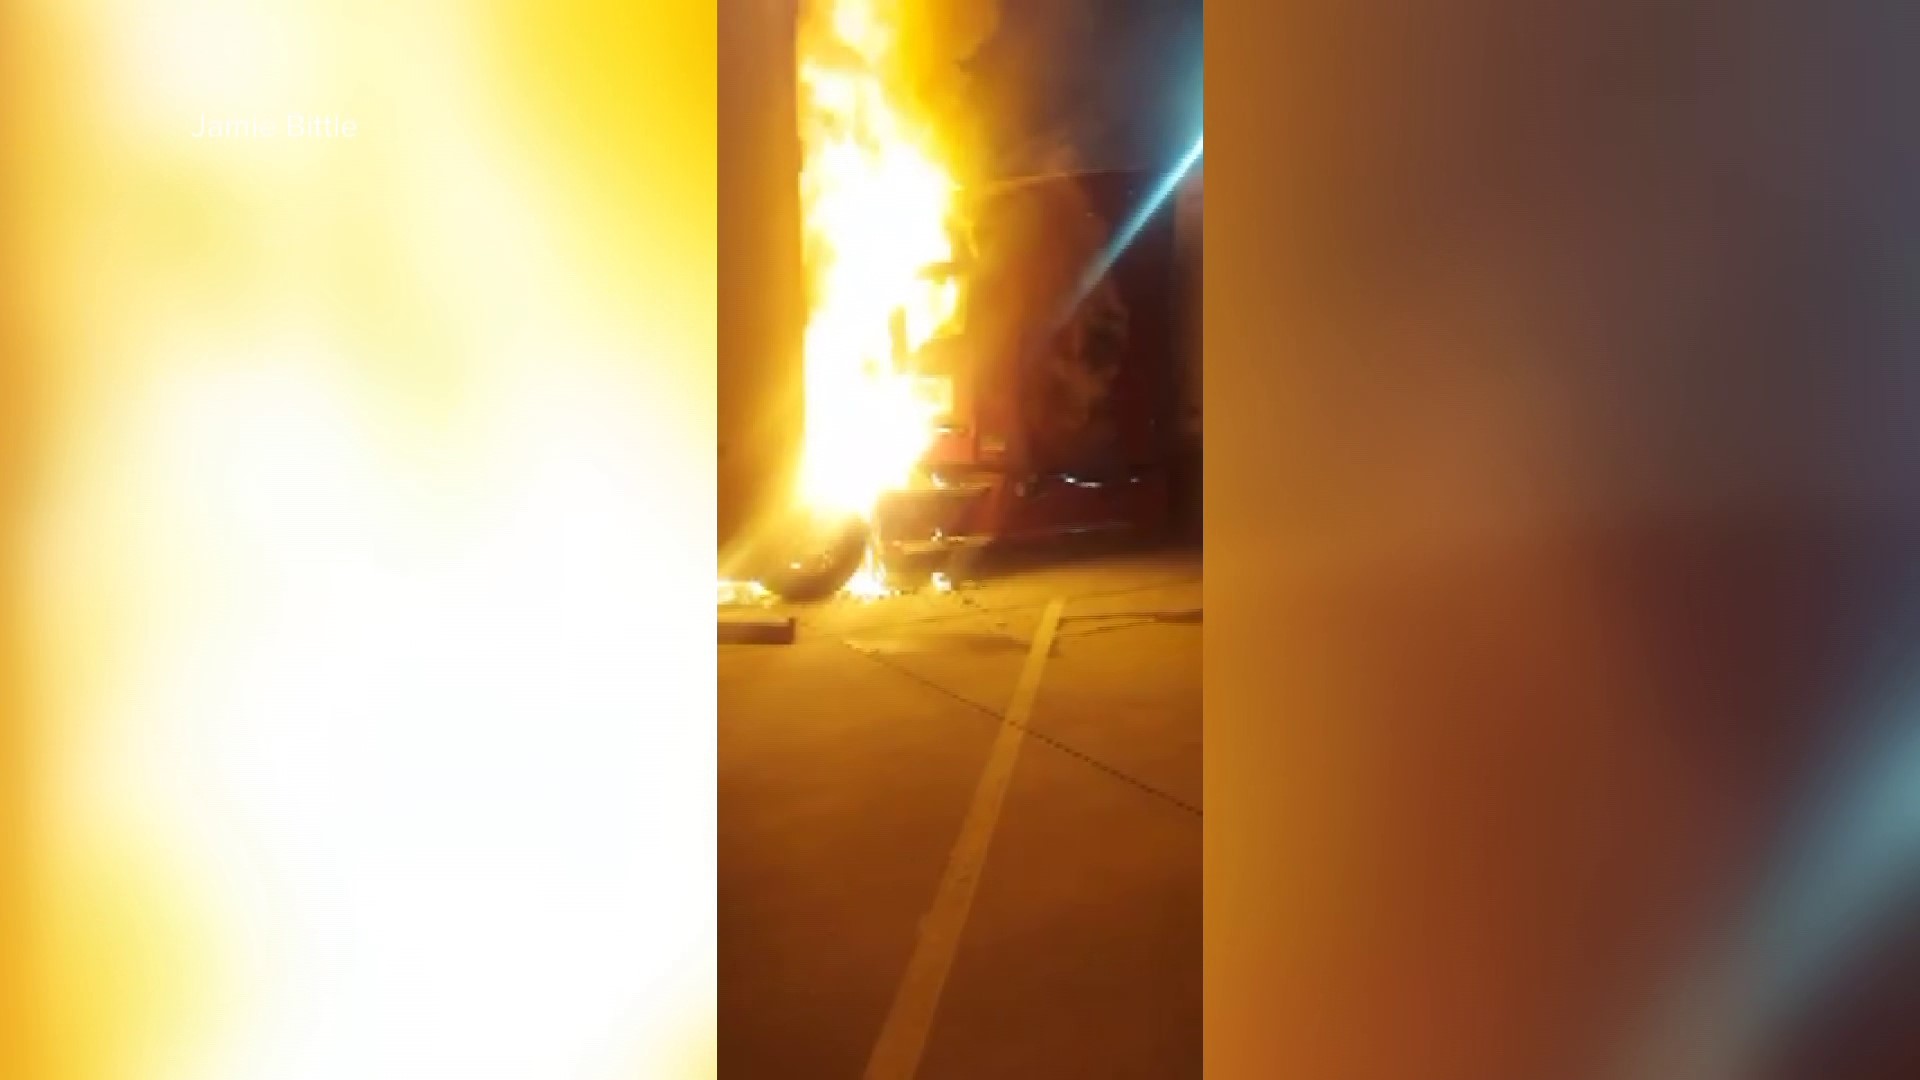 A tractor-trailer driver was able to escape when his truck went up in flames in Iredell County, firefighters said.